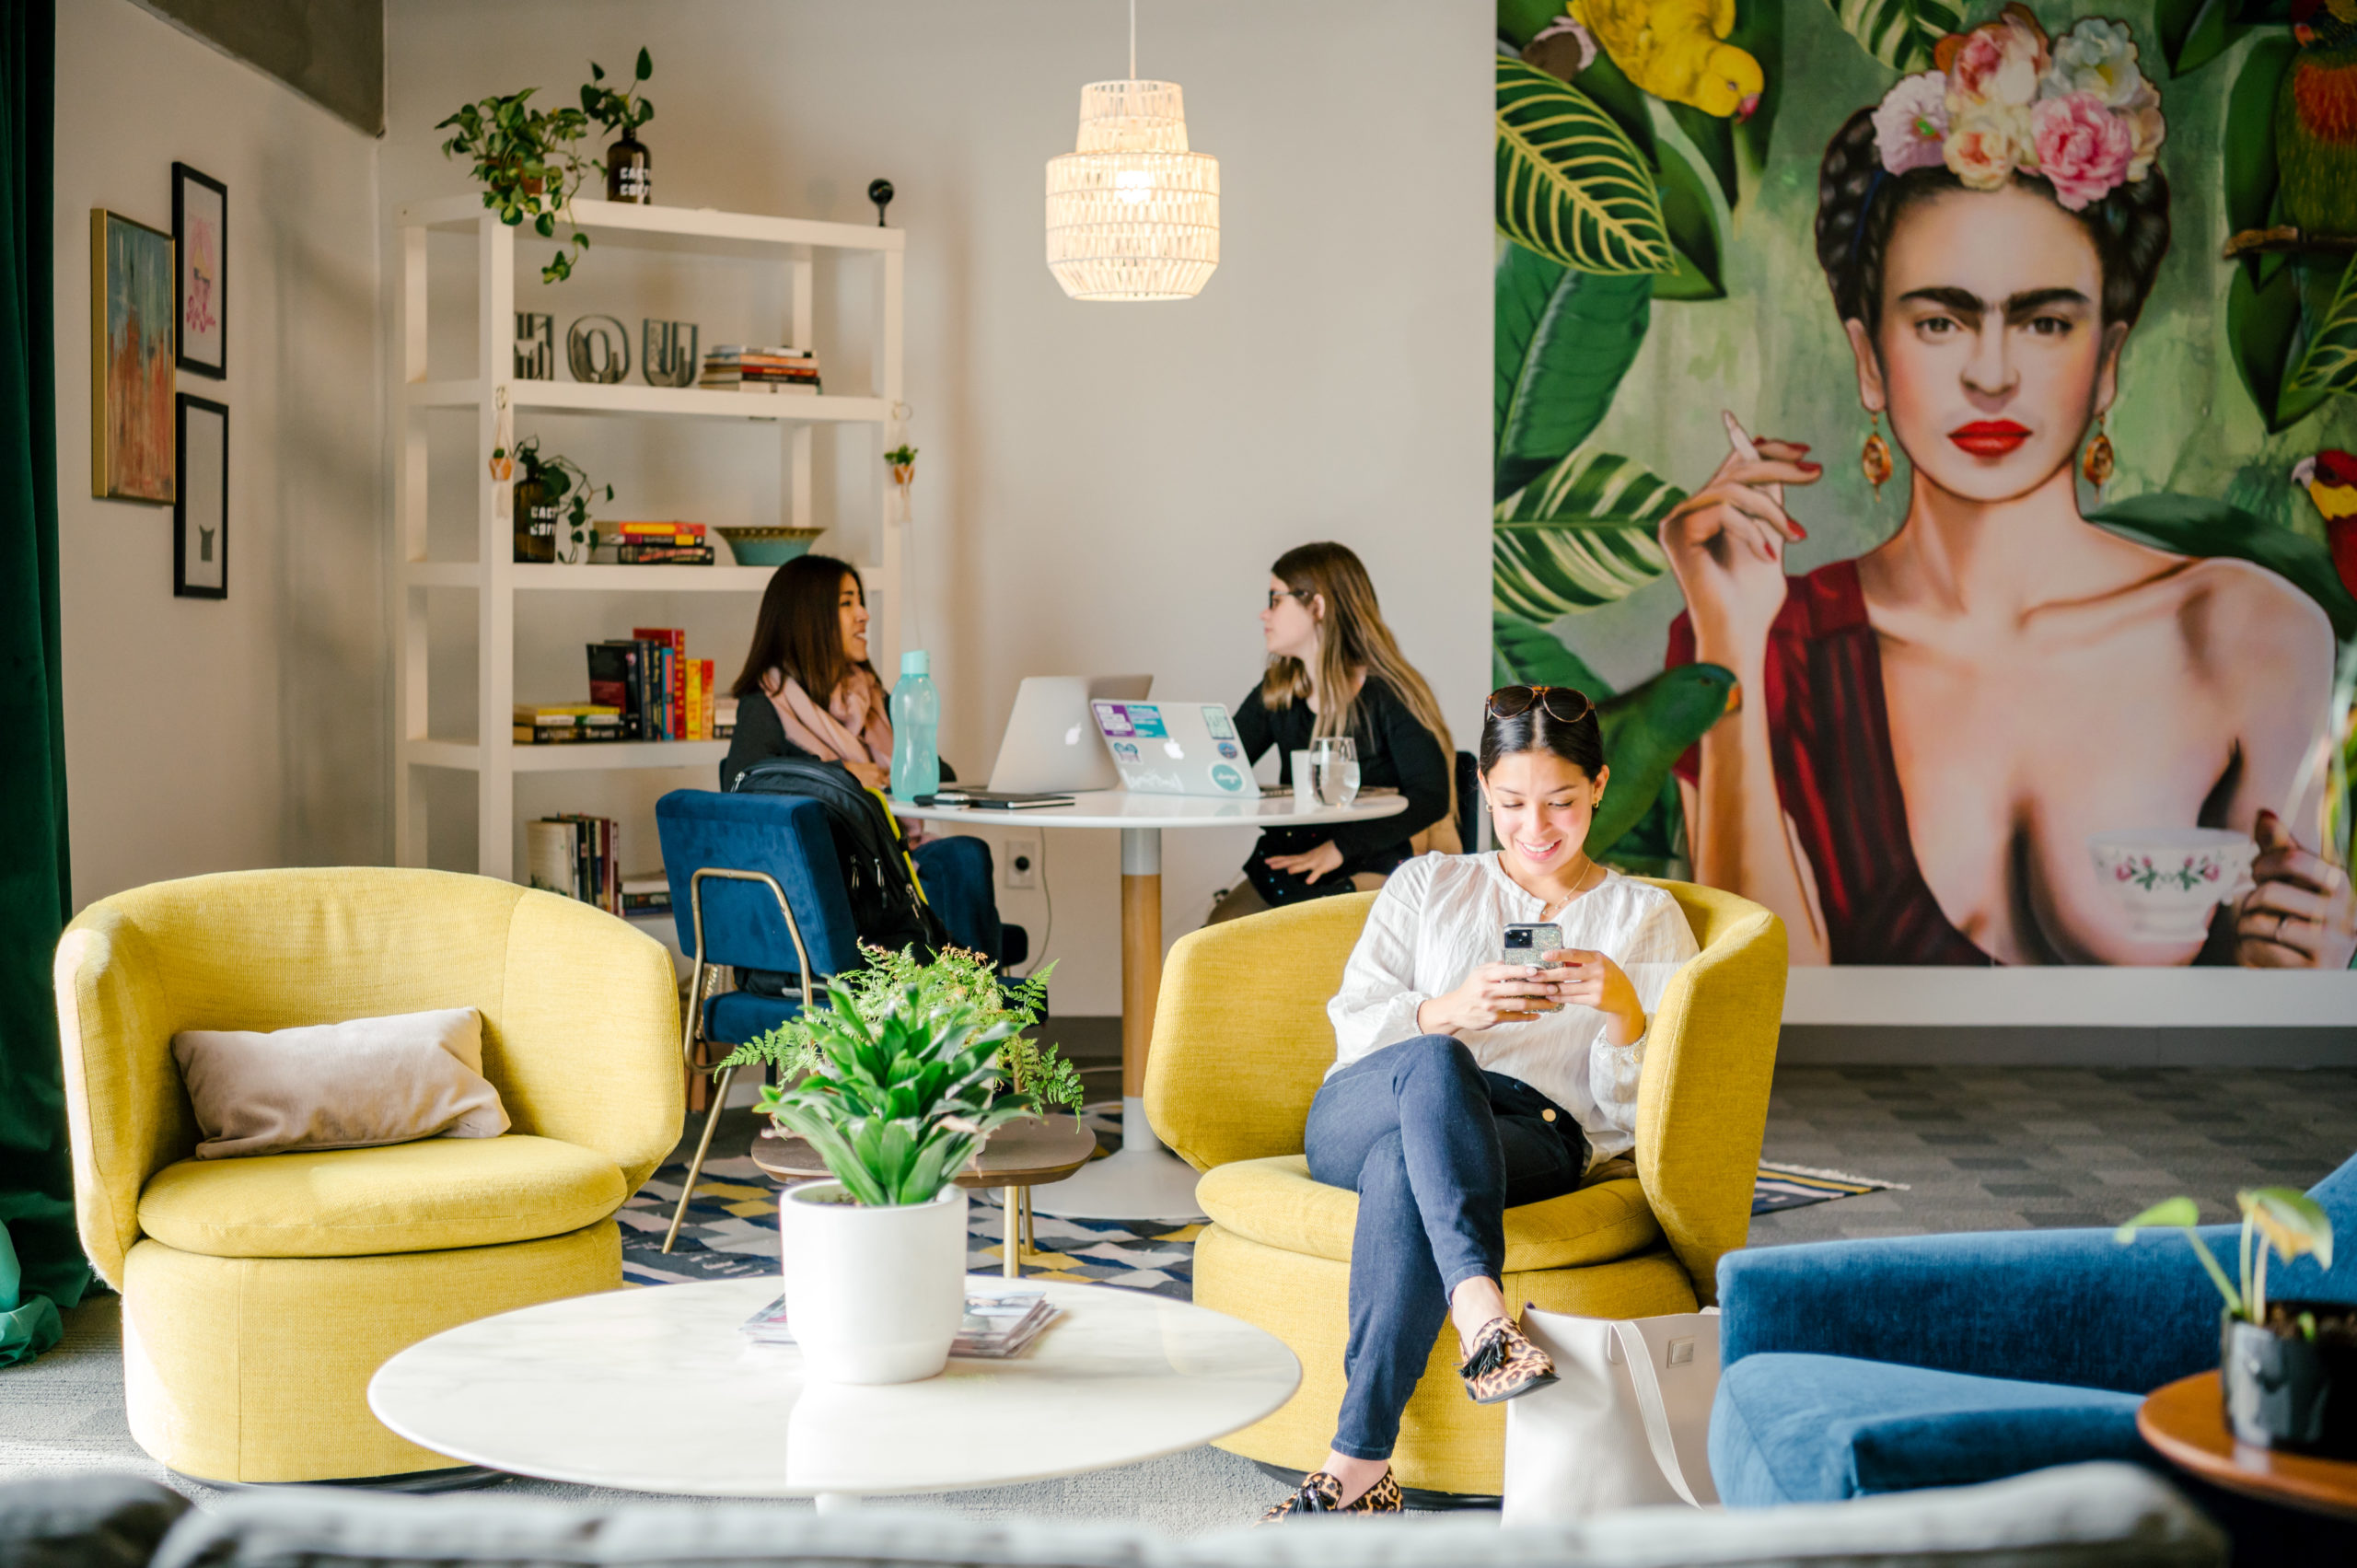 Photo of office interior with people sitting in lounge chairs on their phones and Frida Kahlo art on the wall in the background 